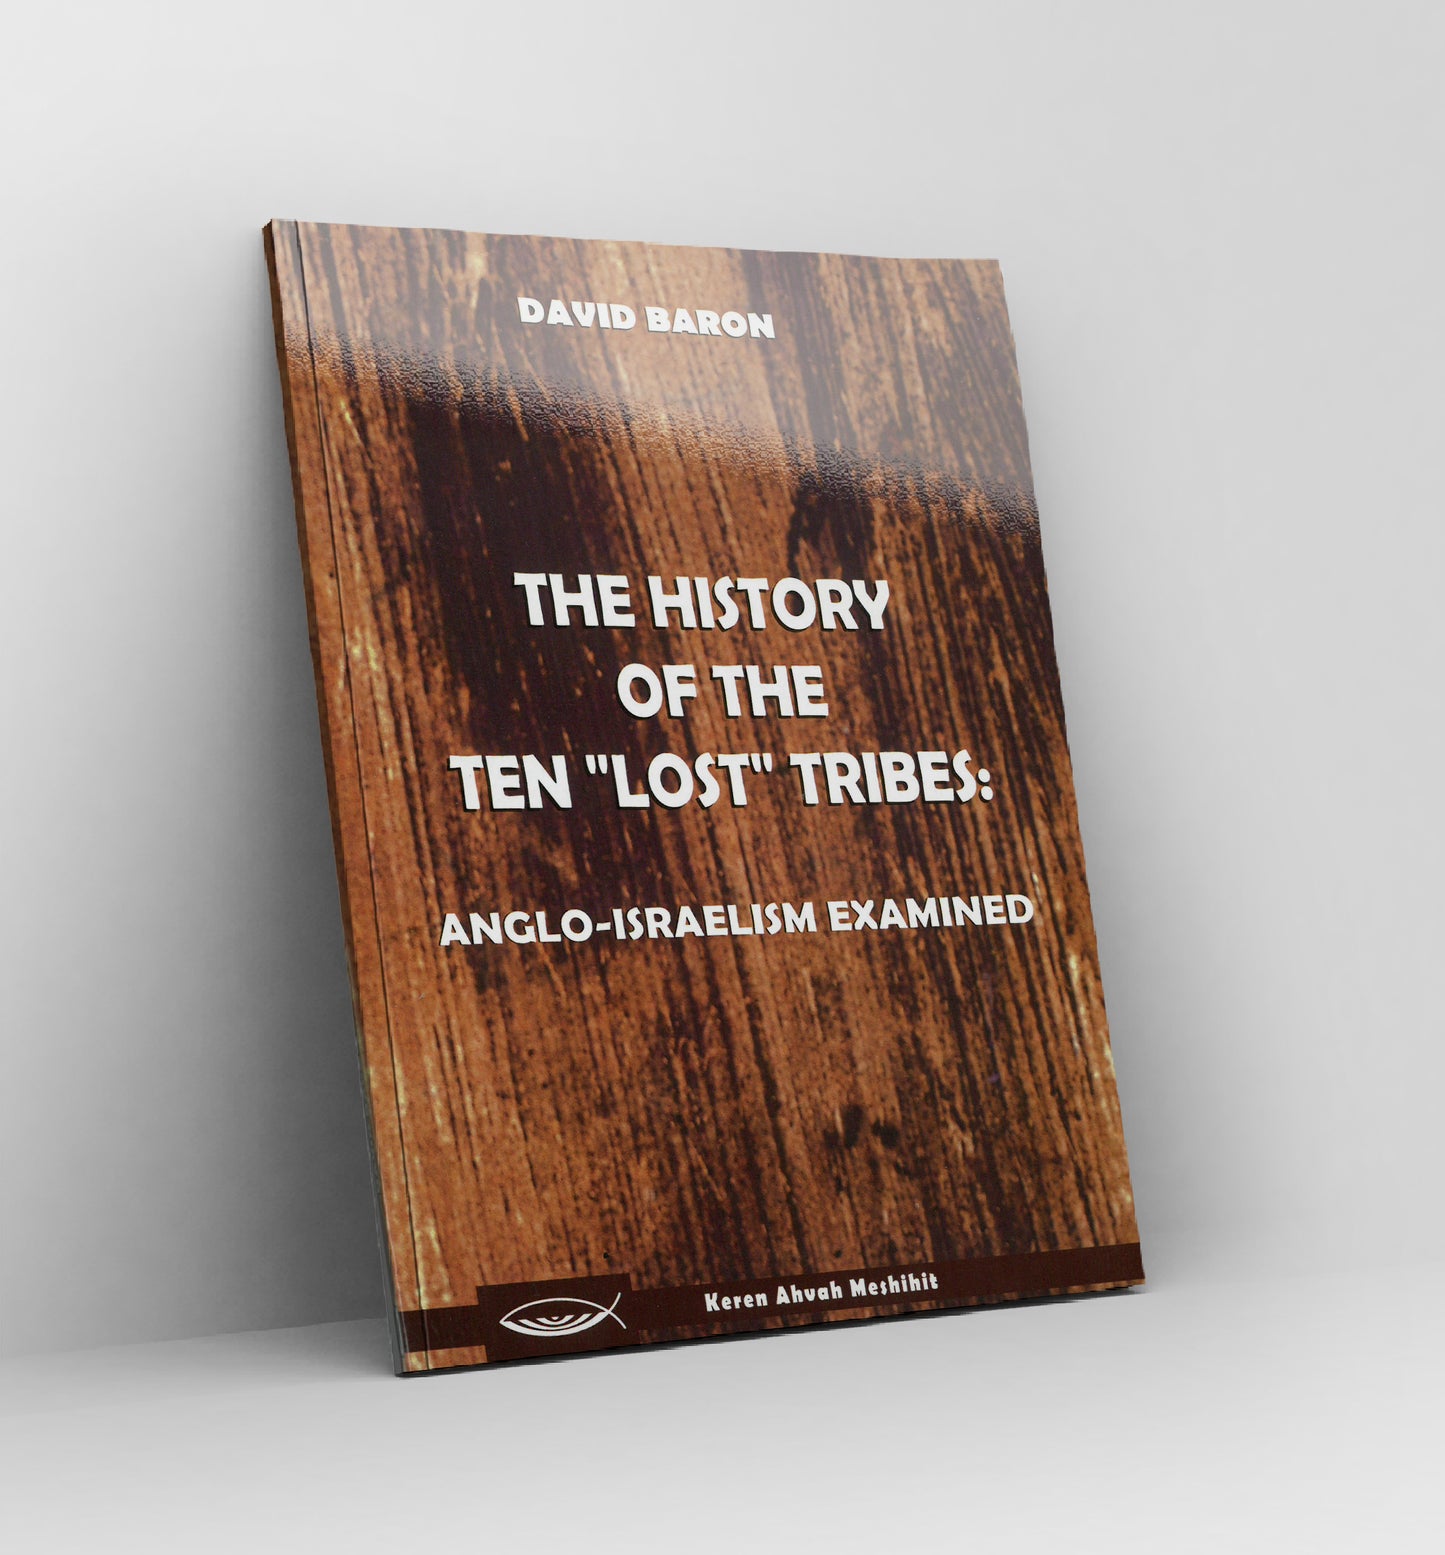 The History of the ten "lost" tribes by David Baron